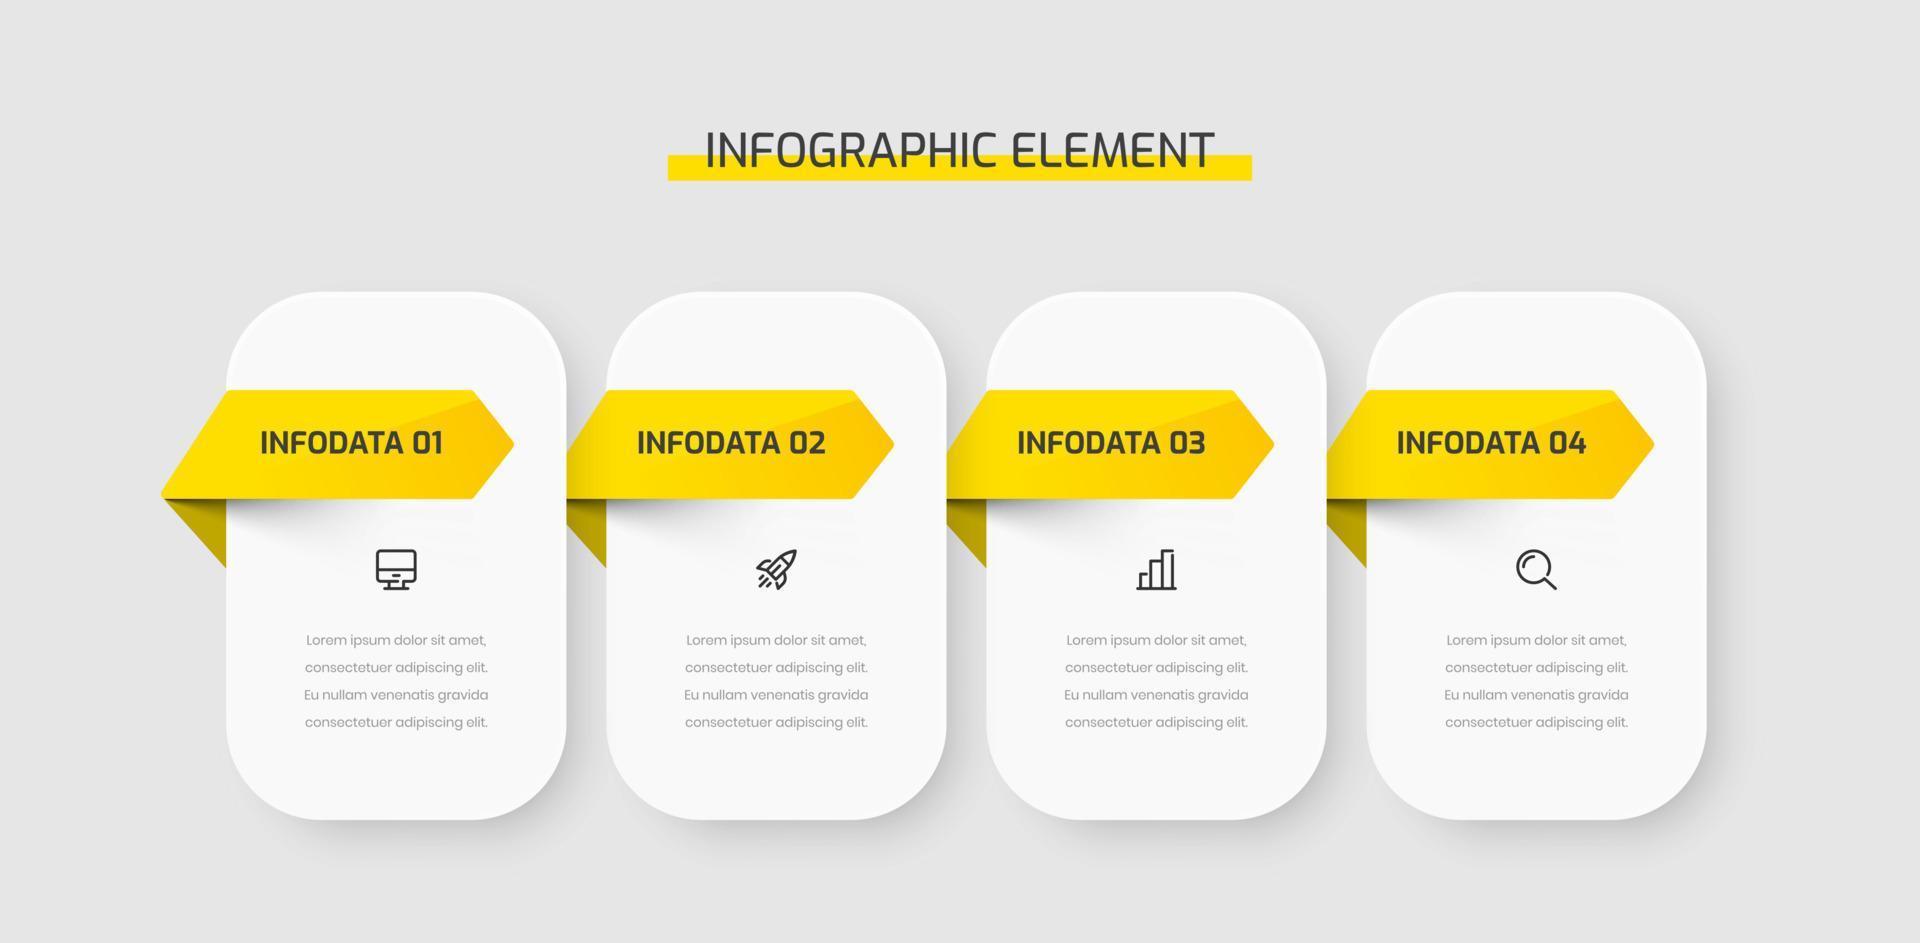 Business Infographic Template Presentation Rounded Rectangle Label with Yellow Color 4 Options, Arrow and Icons. Suitable for Process Diagram, Presentations, Workflow Layout, Banner, Flow Chart vector